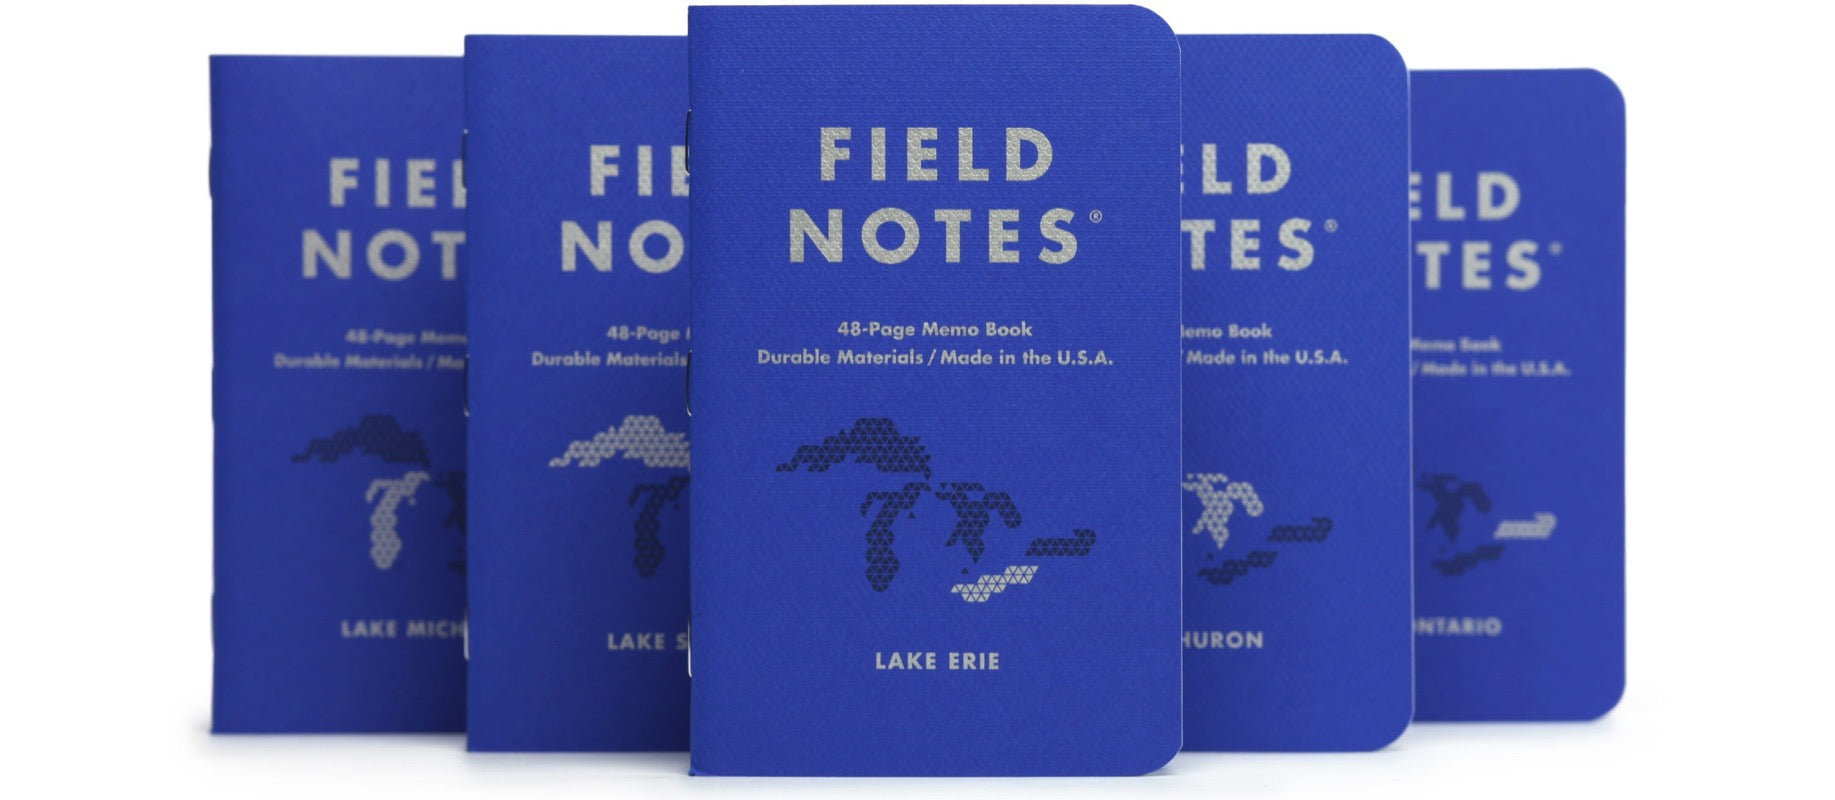 Field Notes, Real Simple